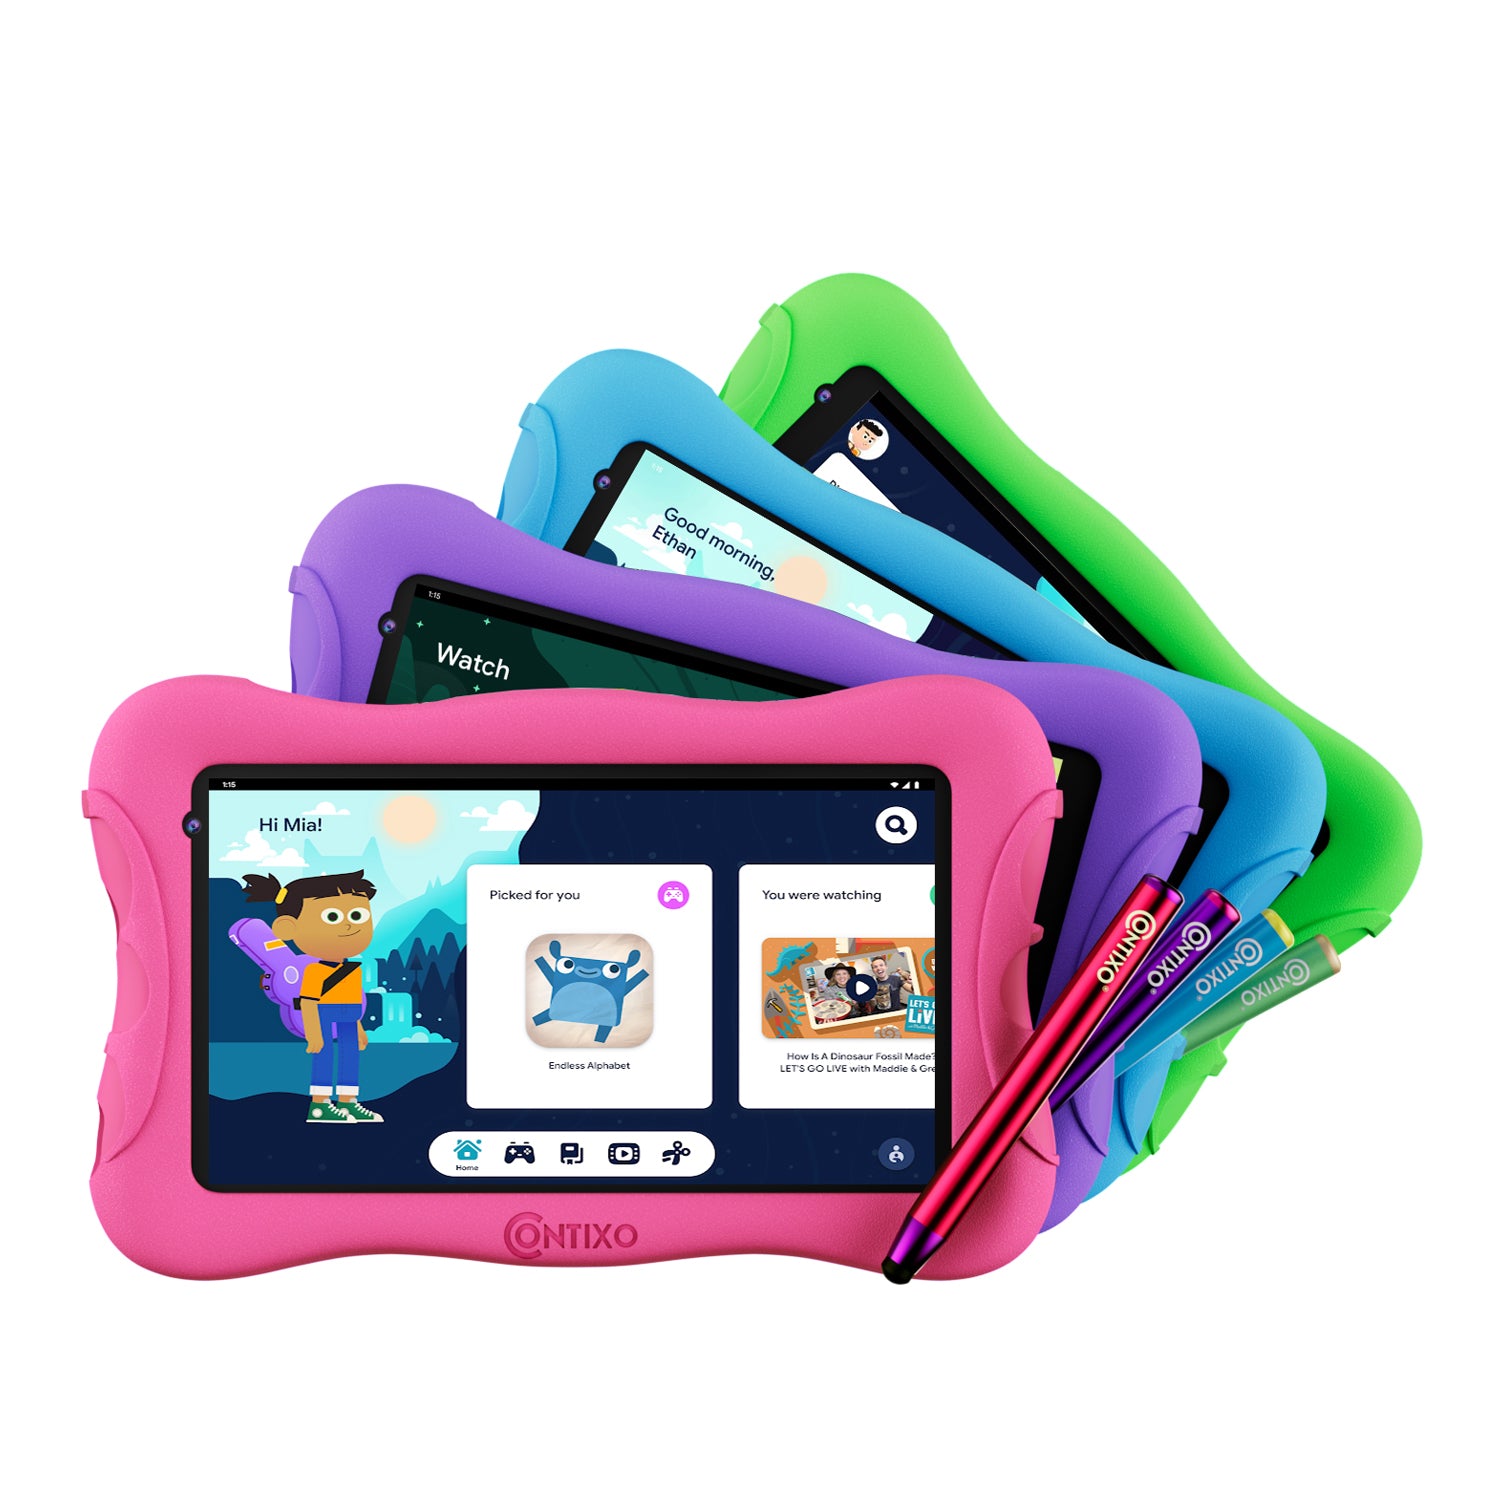 Best kids' tablets for learning and playing games in 2023